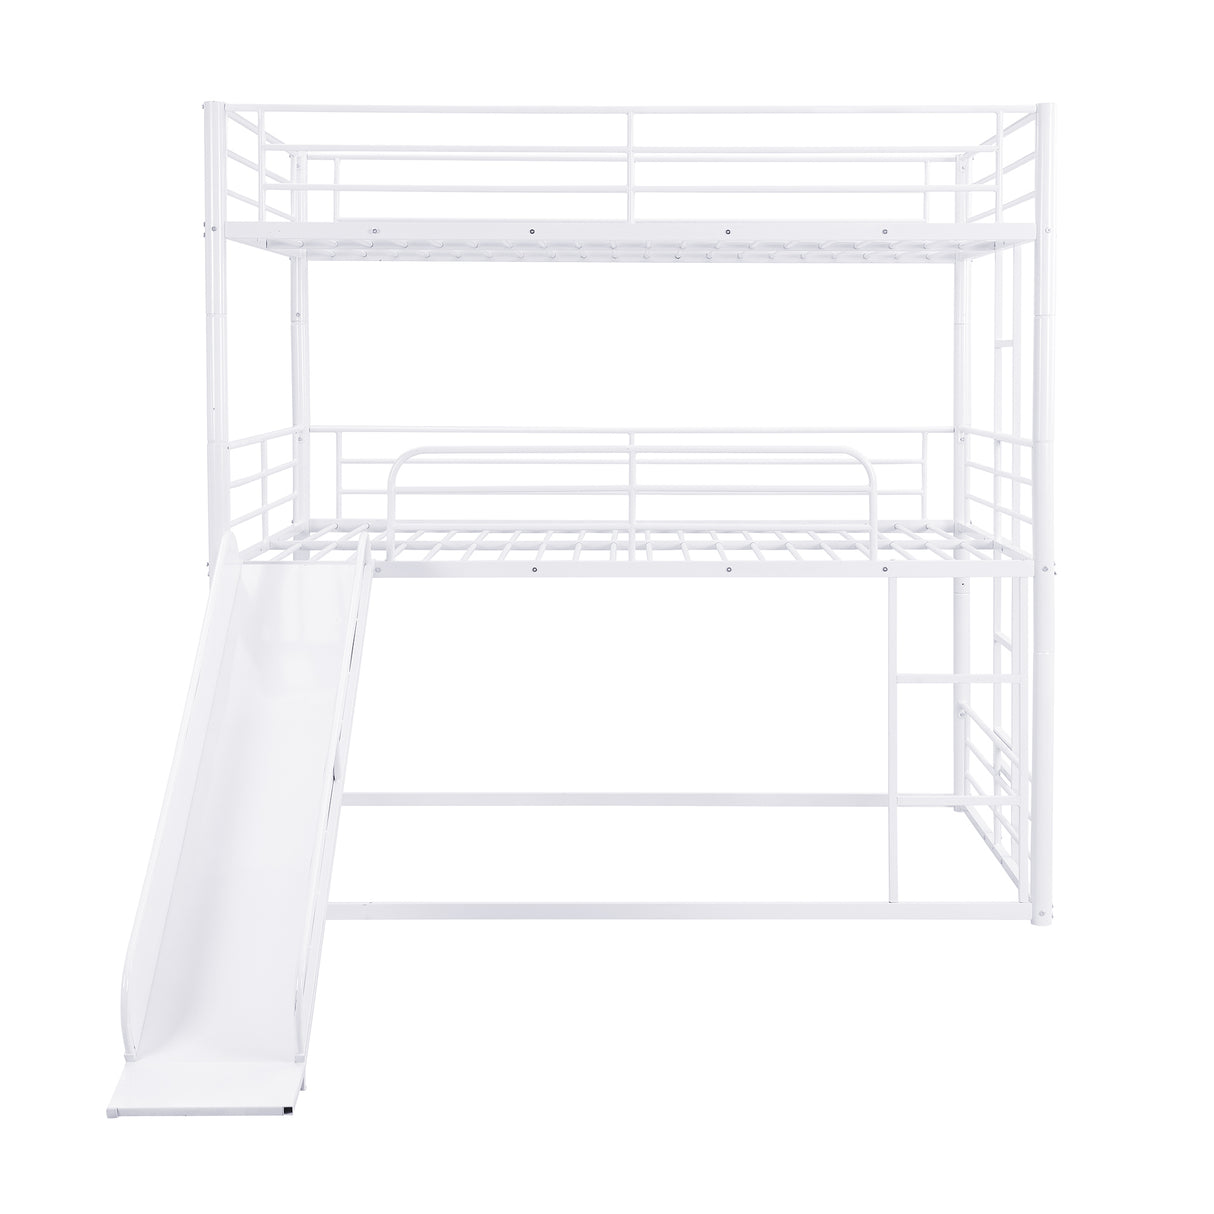 Full Size Metal Bunk Bed with Ladders and Slide, Divided into One Platform and Loft Bed, White - Home Elegance USA